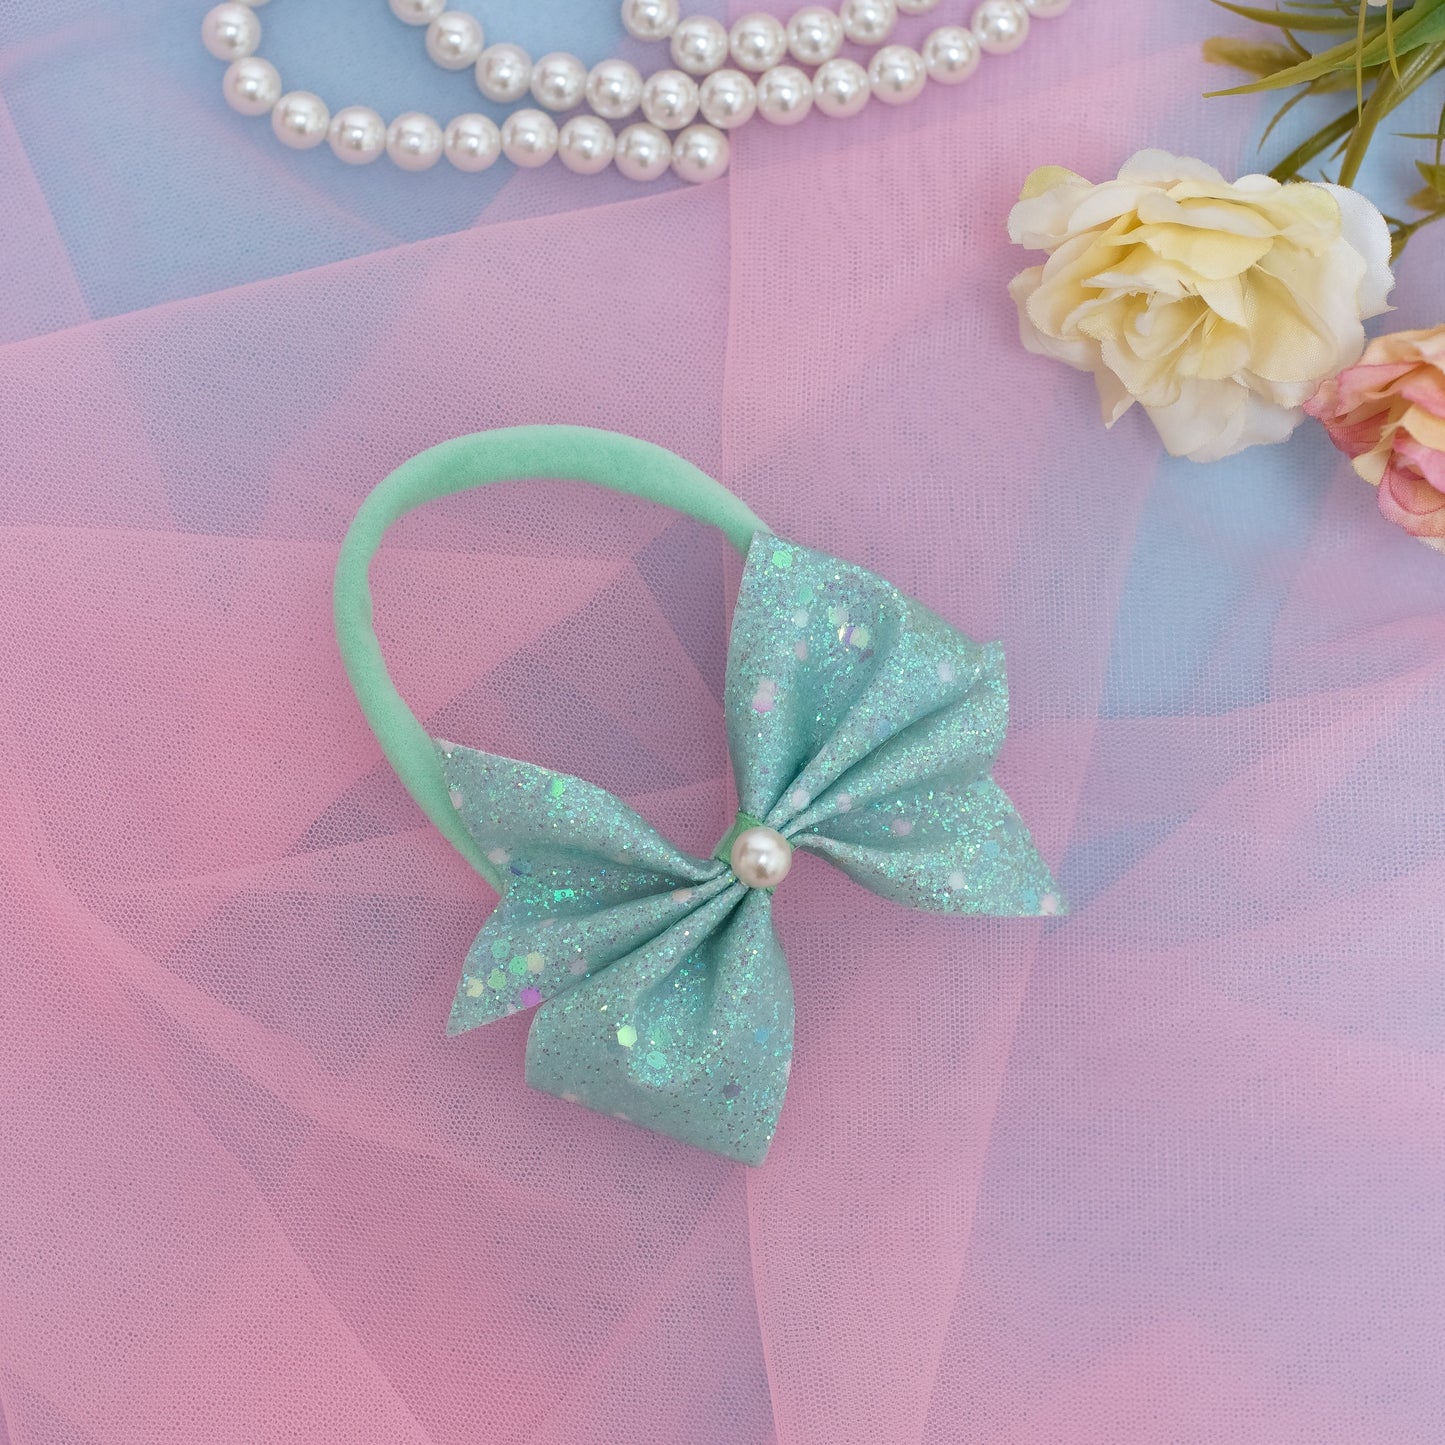 Super Soft Infant Stretchy bands with a Glitter Bow - Sea Green